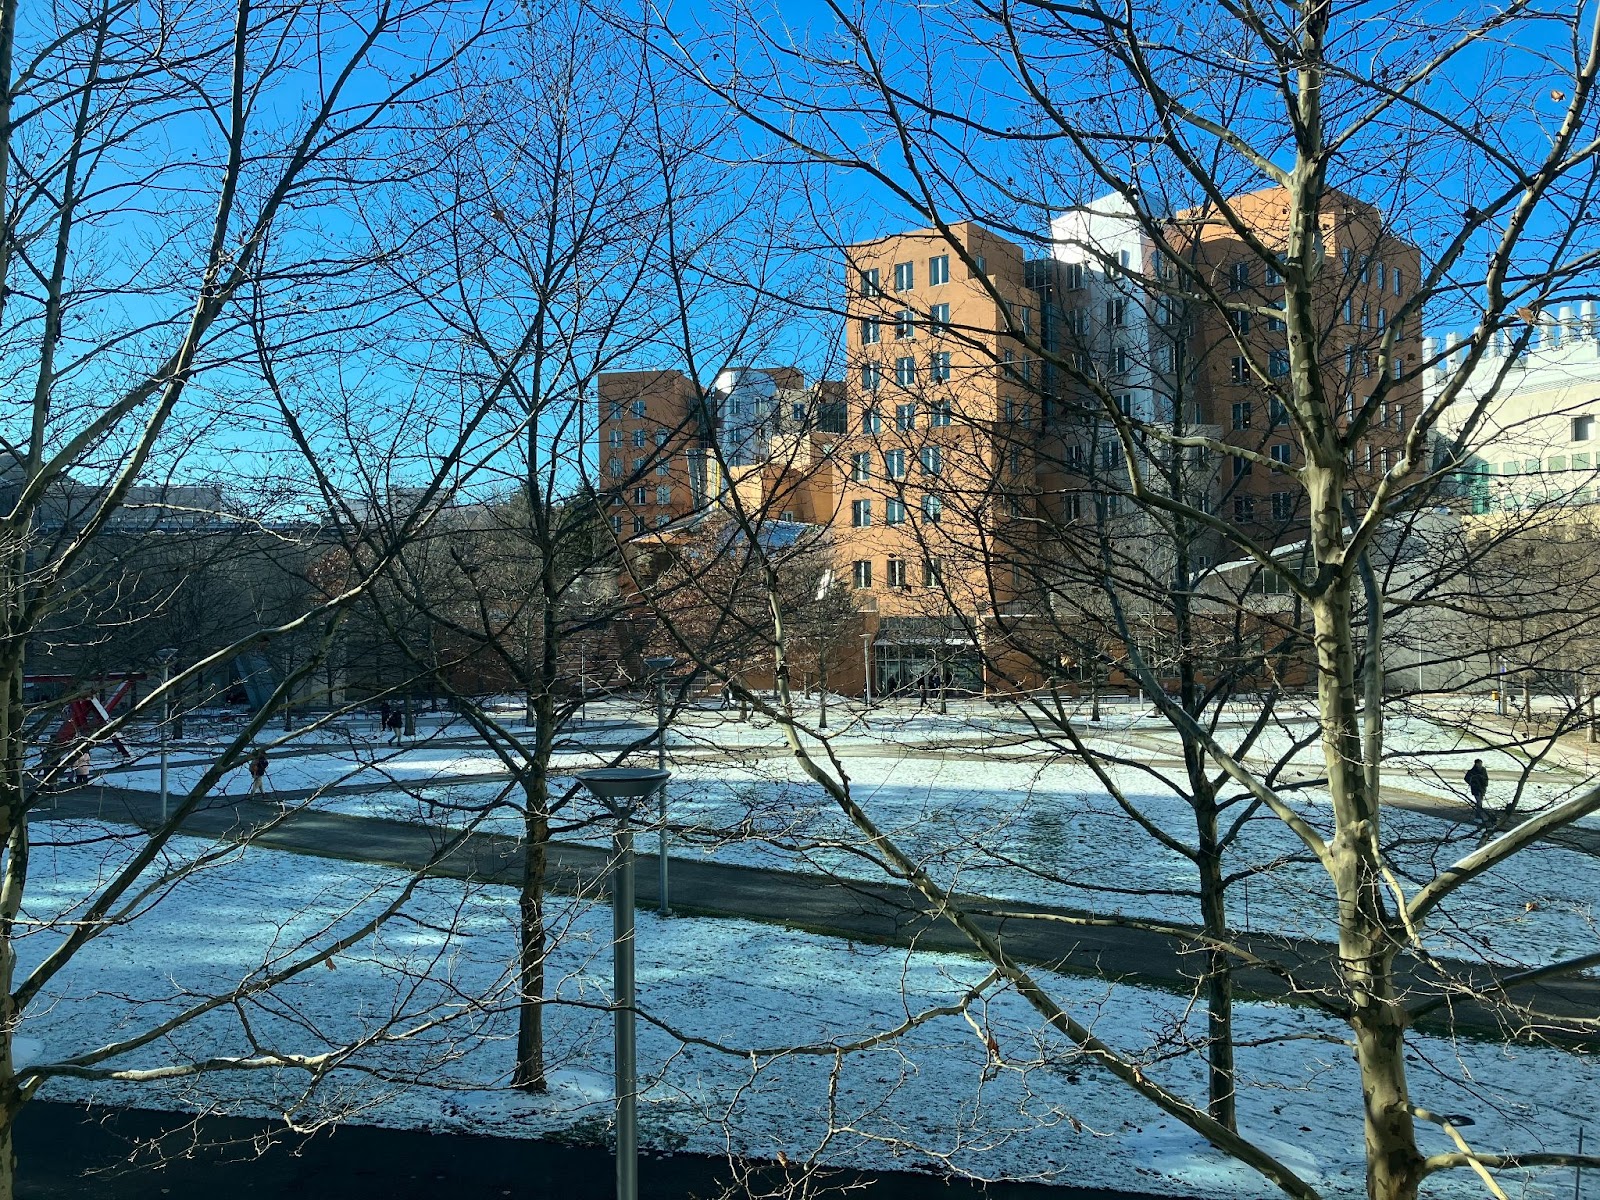 A wintry view, described above, of the Stata building across Hockfield Court.